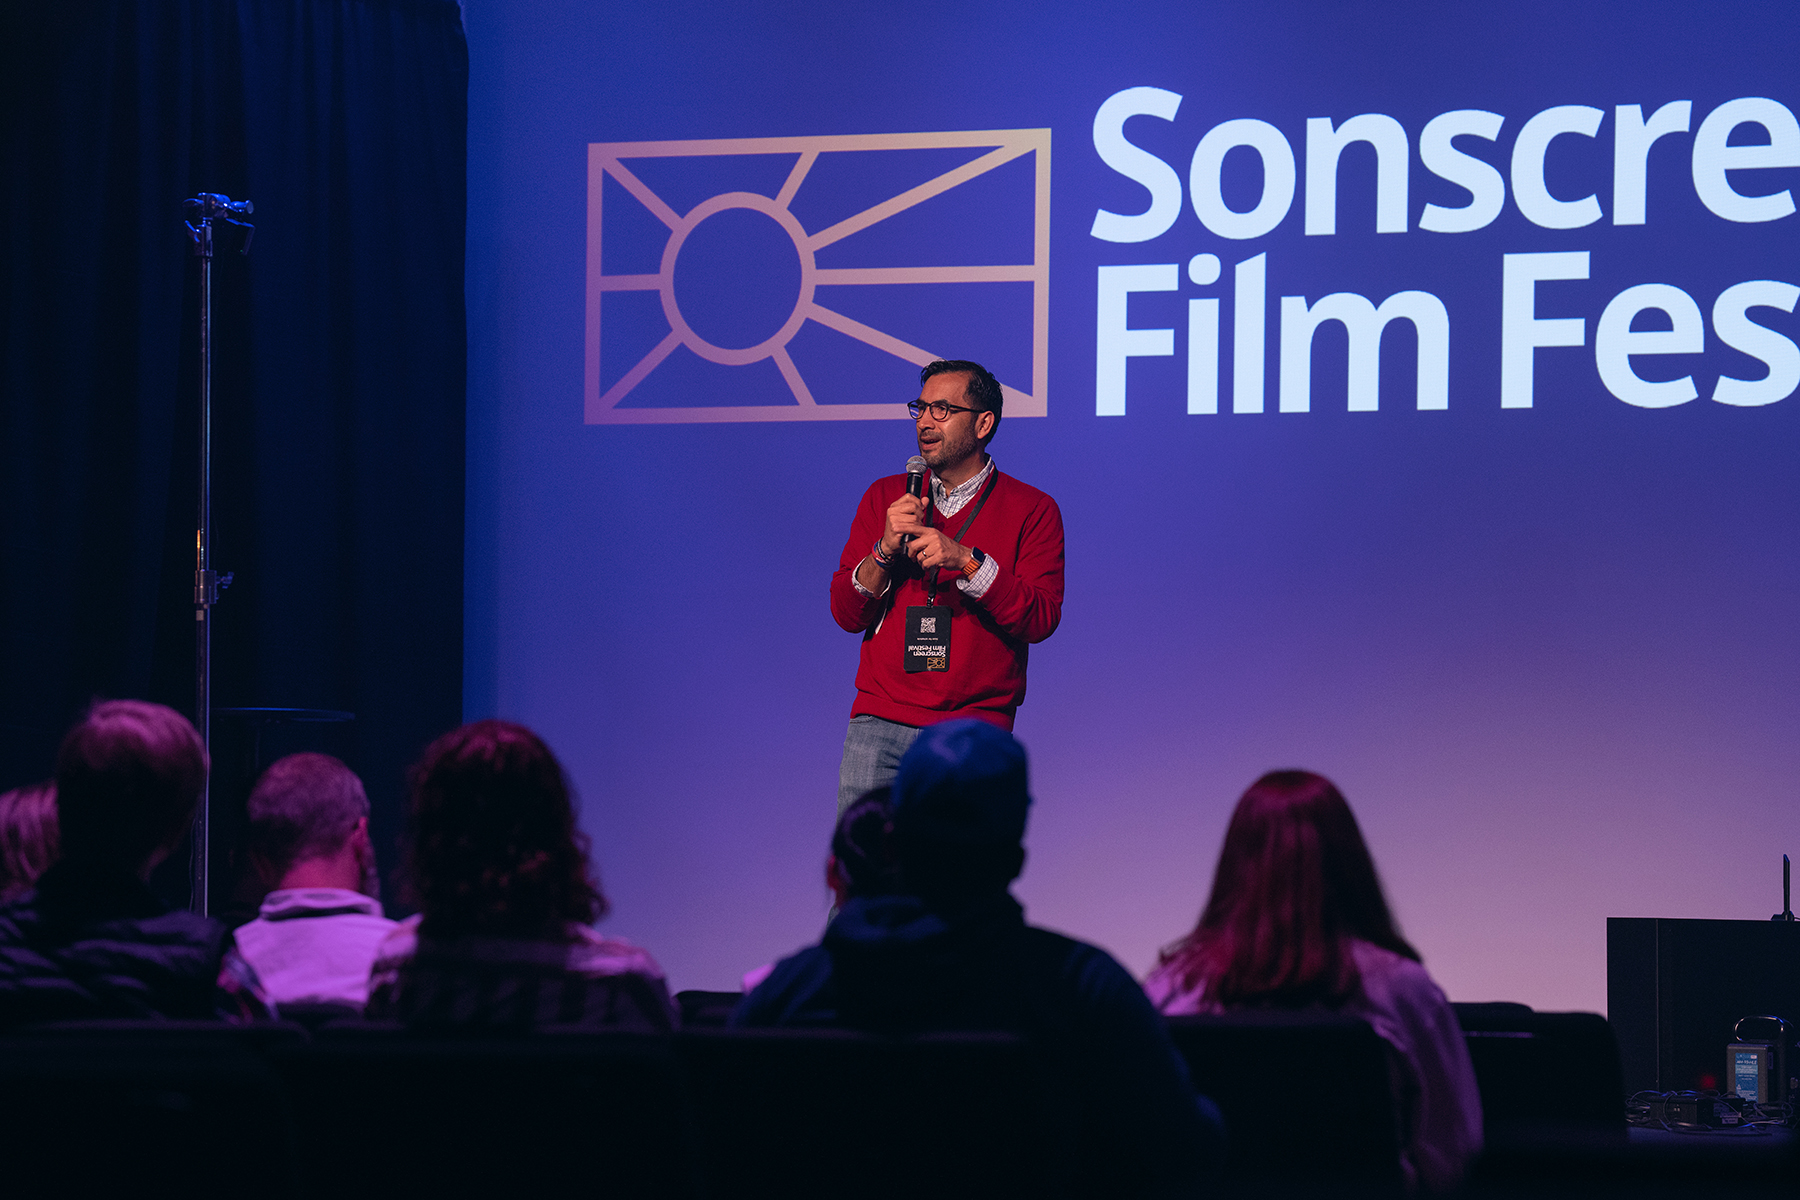 A man stands on a stage speaking in front of a screen with a backdrop reading "Sonscreen Film Festival."